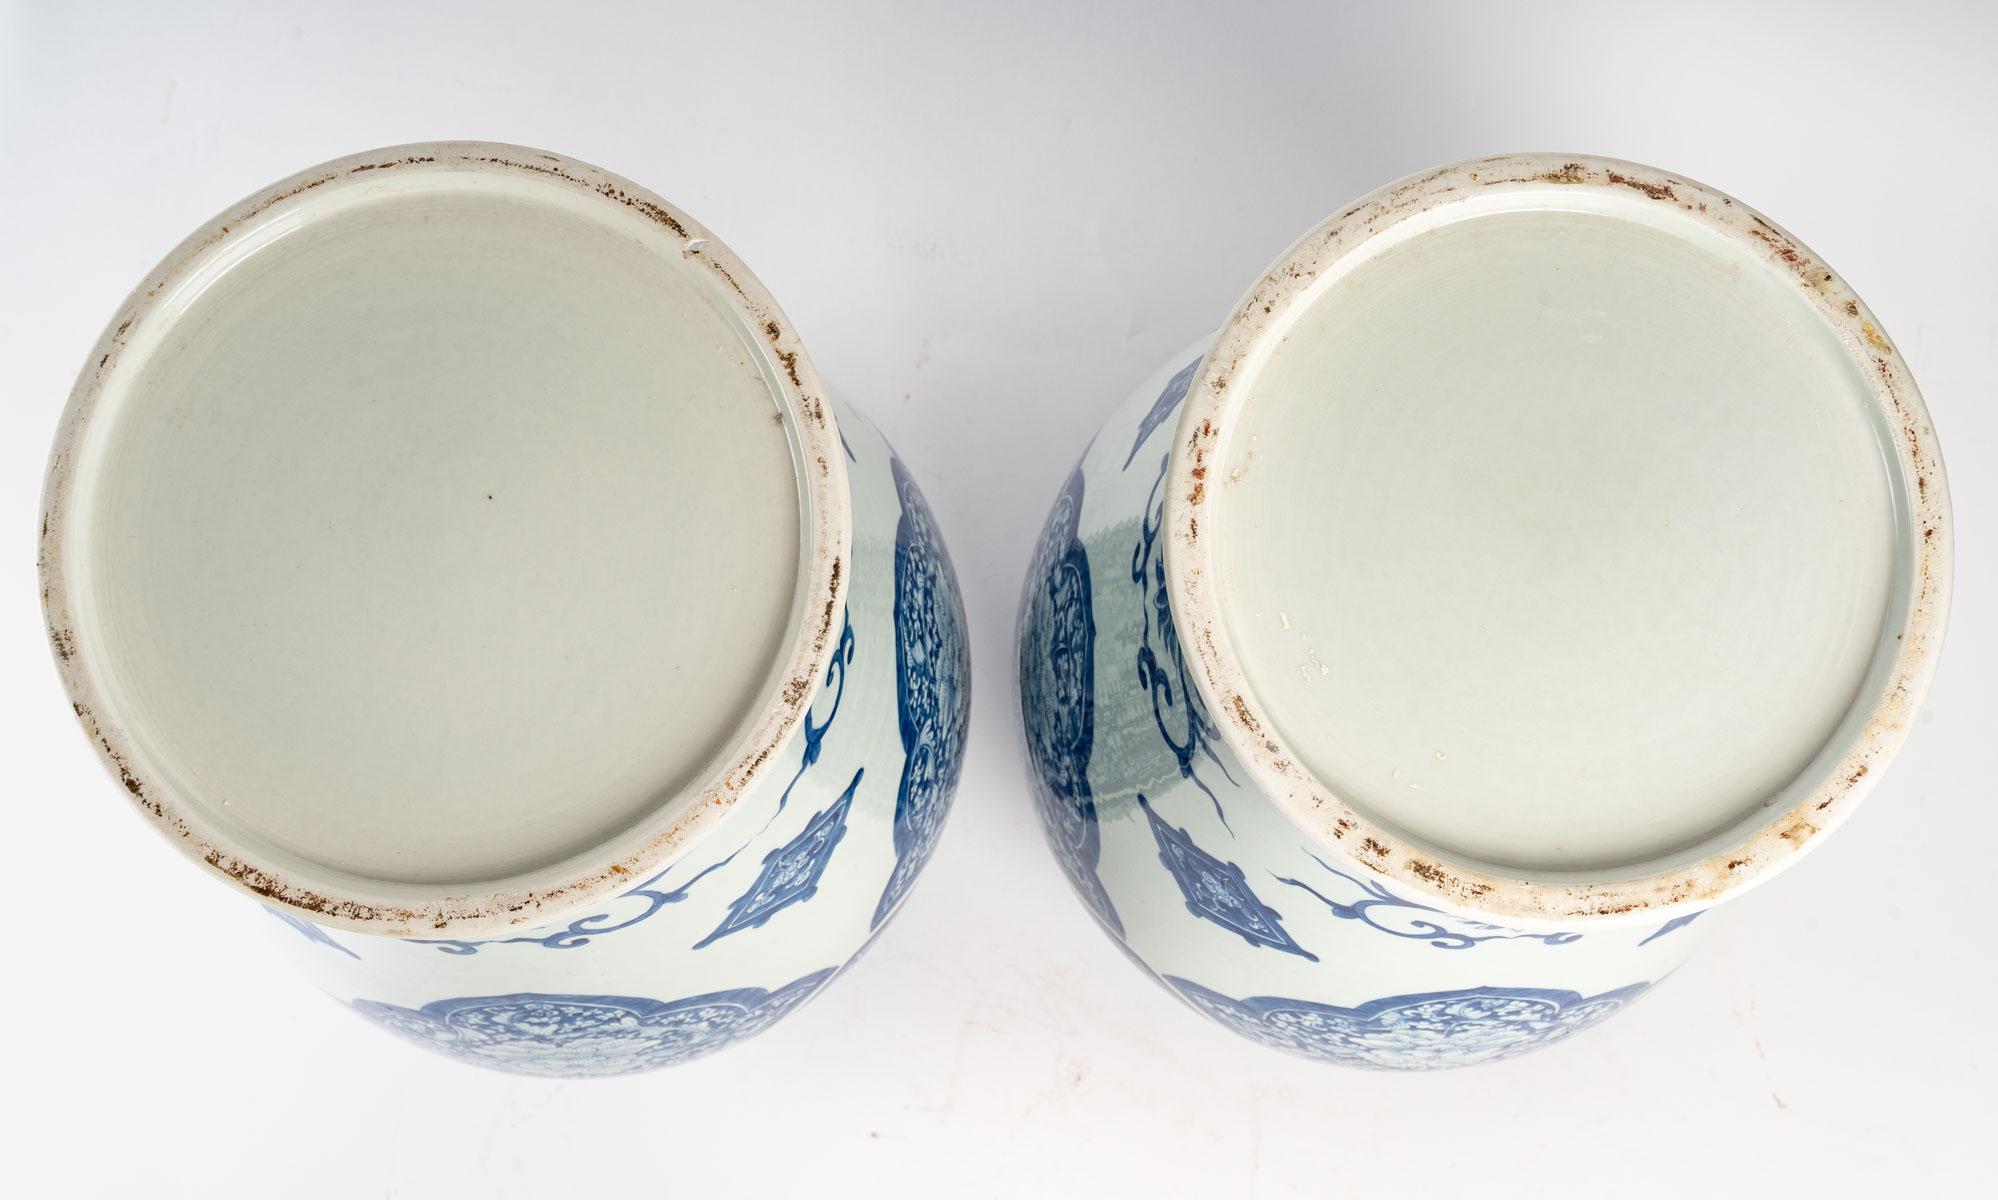 Pair of porcelain covered vases with white-blue hand-painted decoration.
China, 20th century.
Measures: H: 58 cm, d: 29 cm.